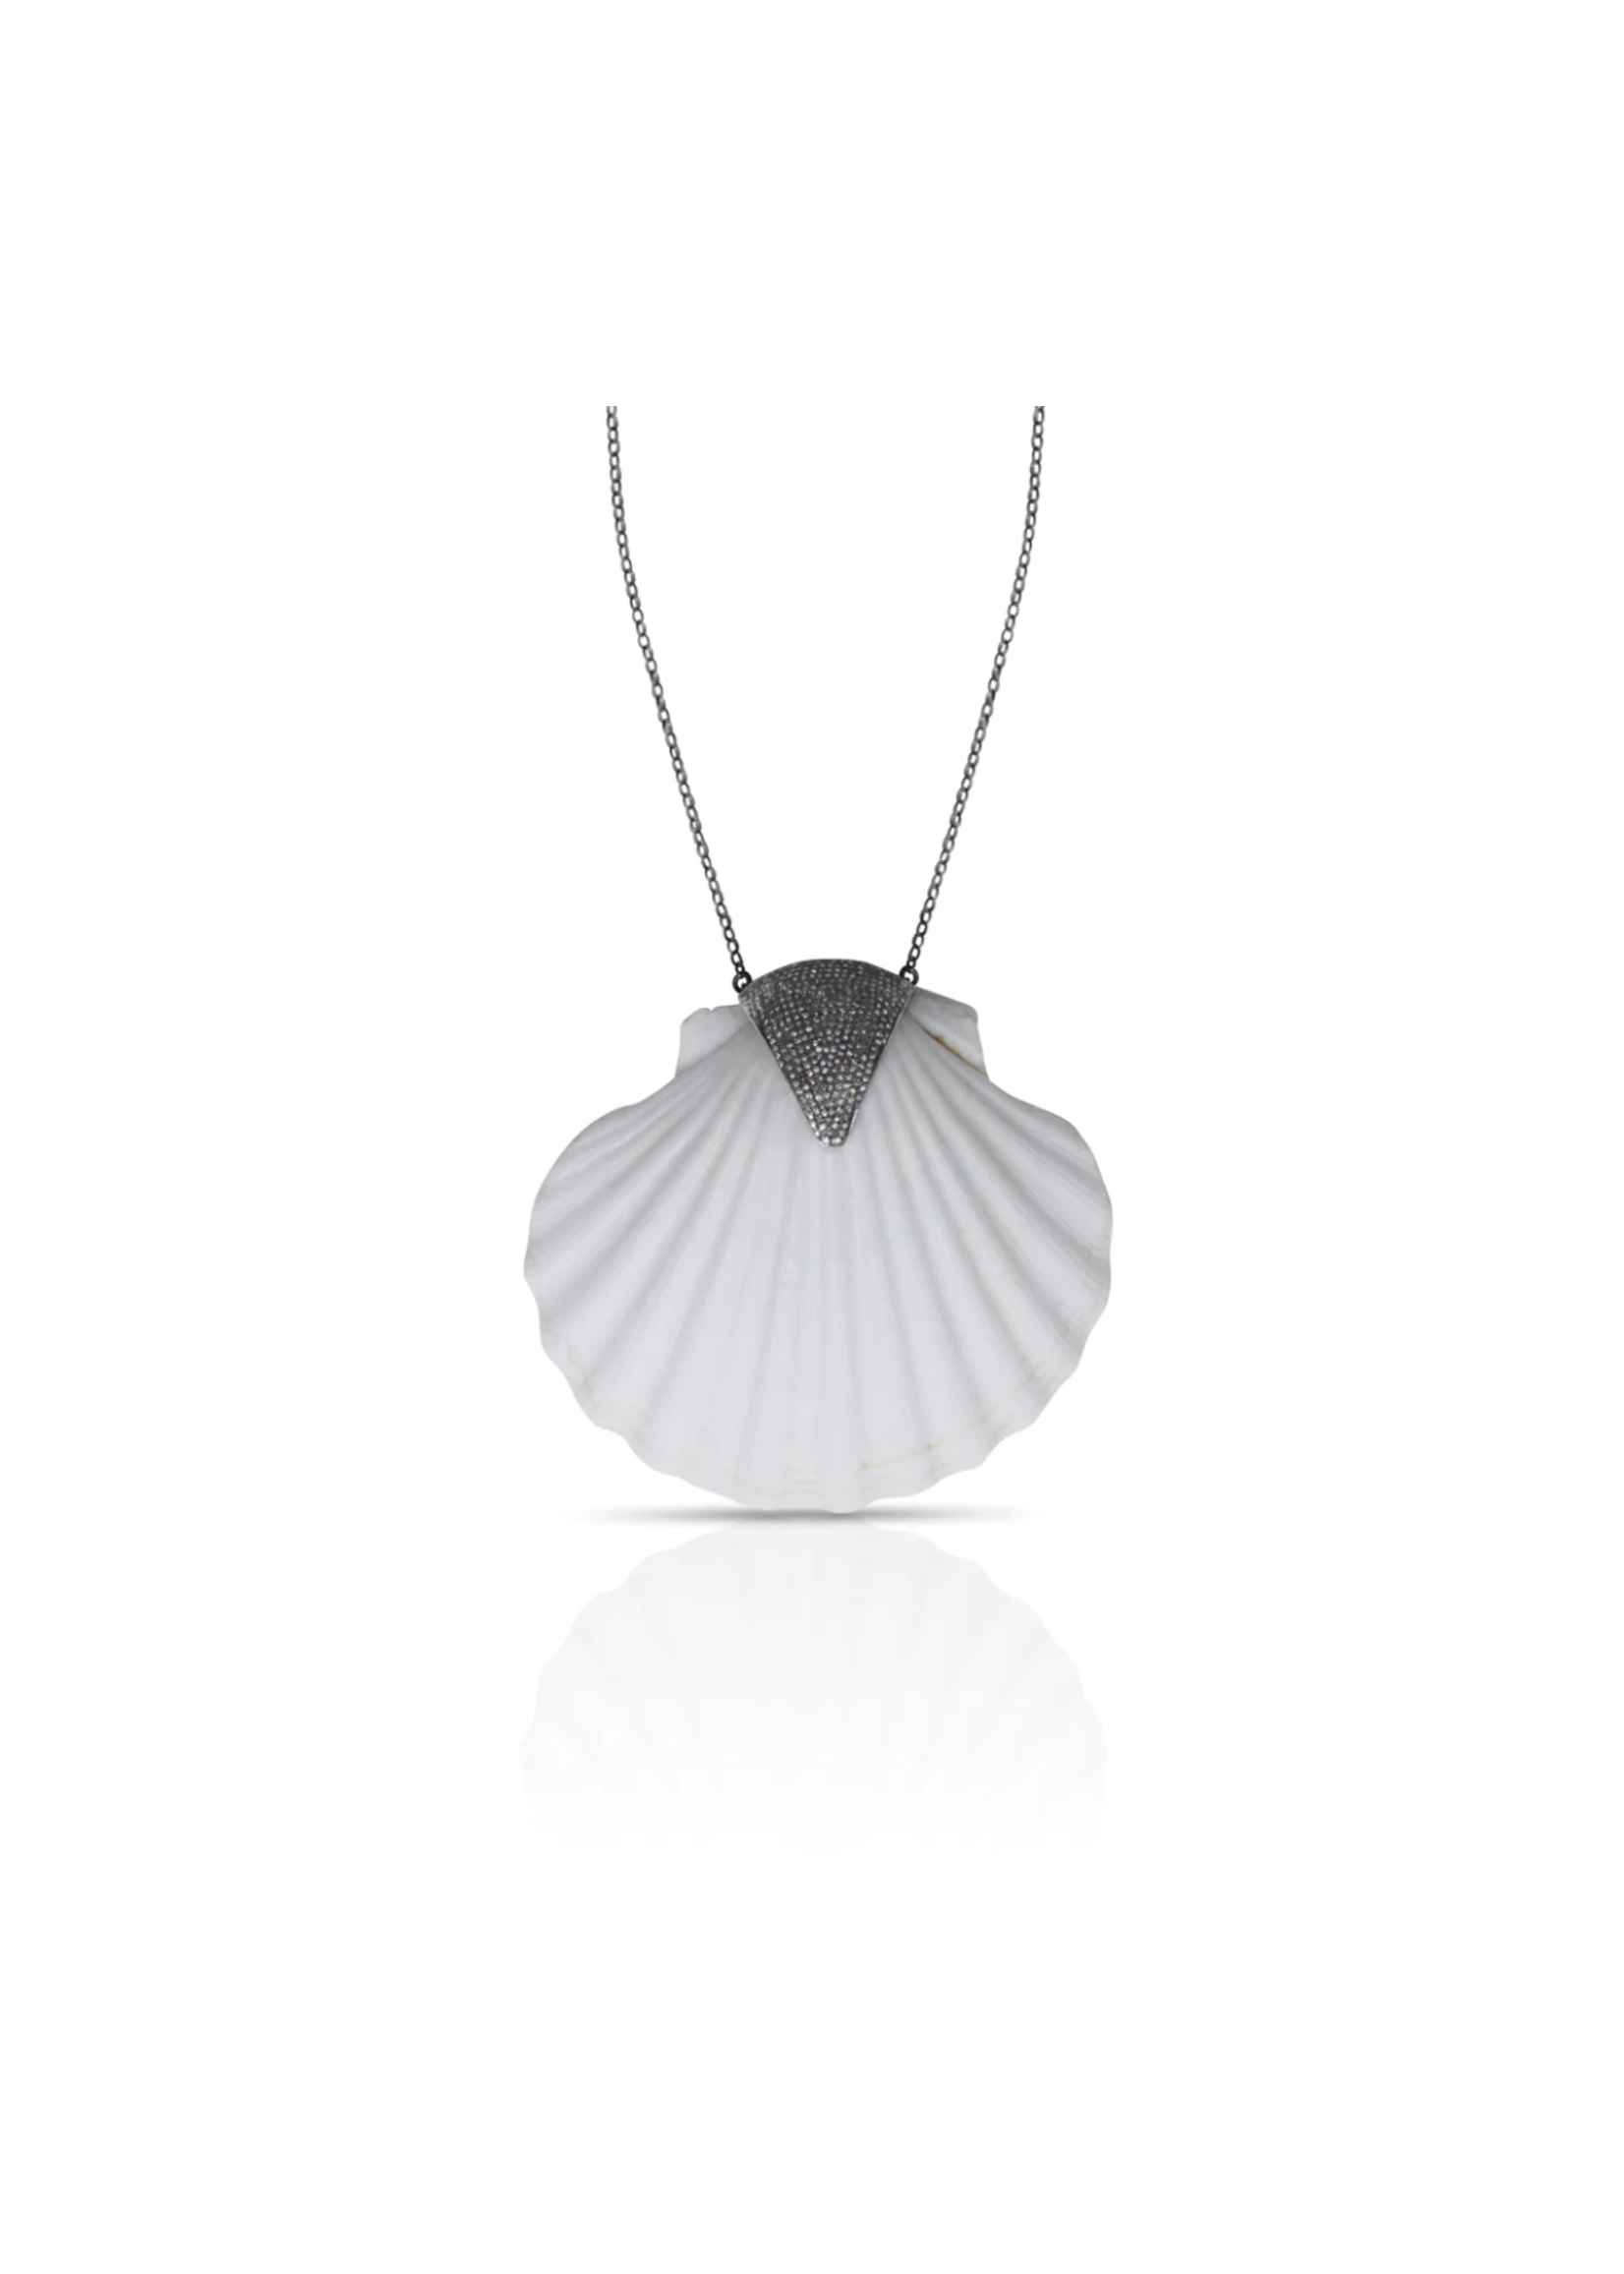 S. Carter Designs Jumbo Scallop Shell Necklace